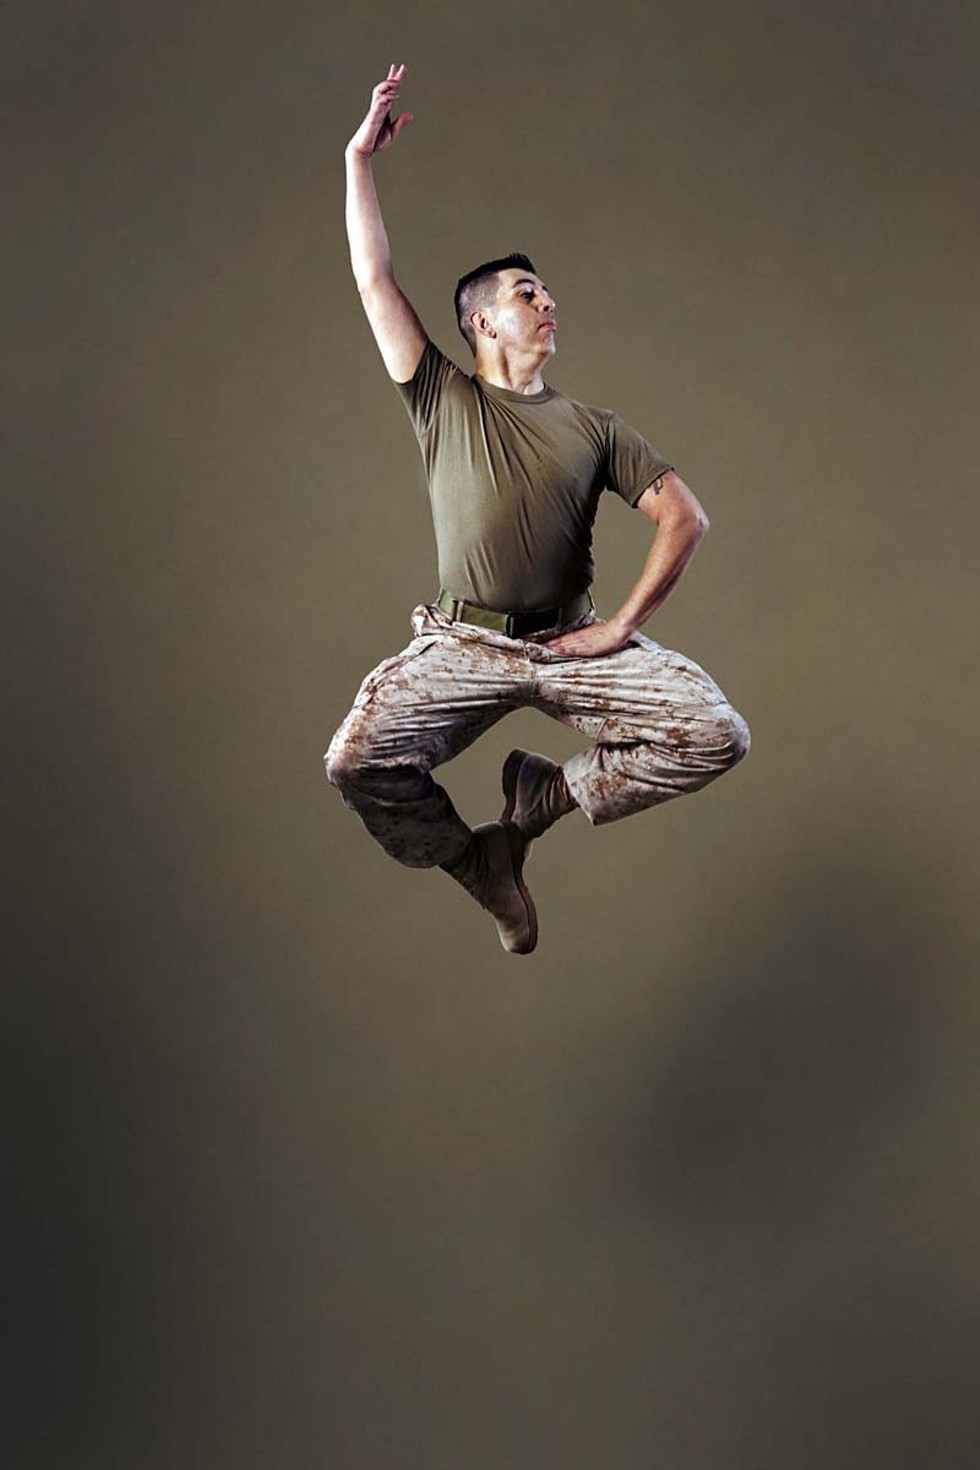 Dances by Iraq war veteran Roman Baca and his Exit 12 Dance Company at the Rosendale Theatre.